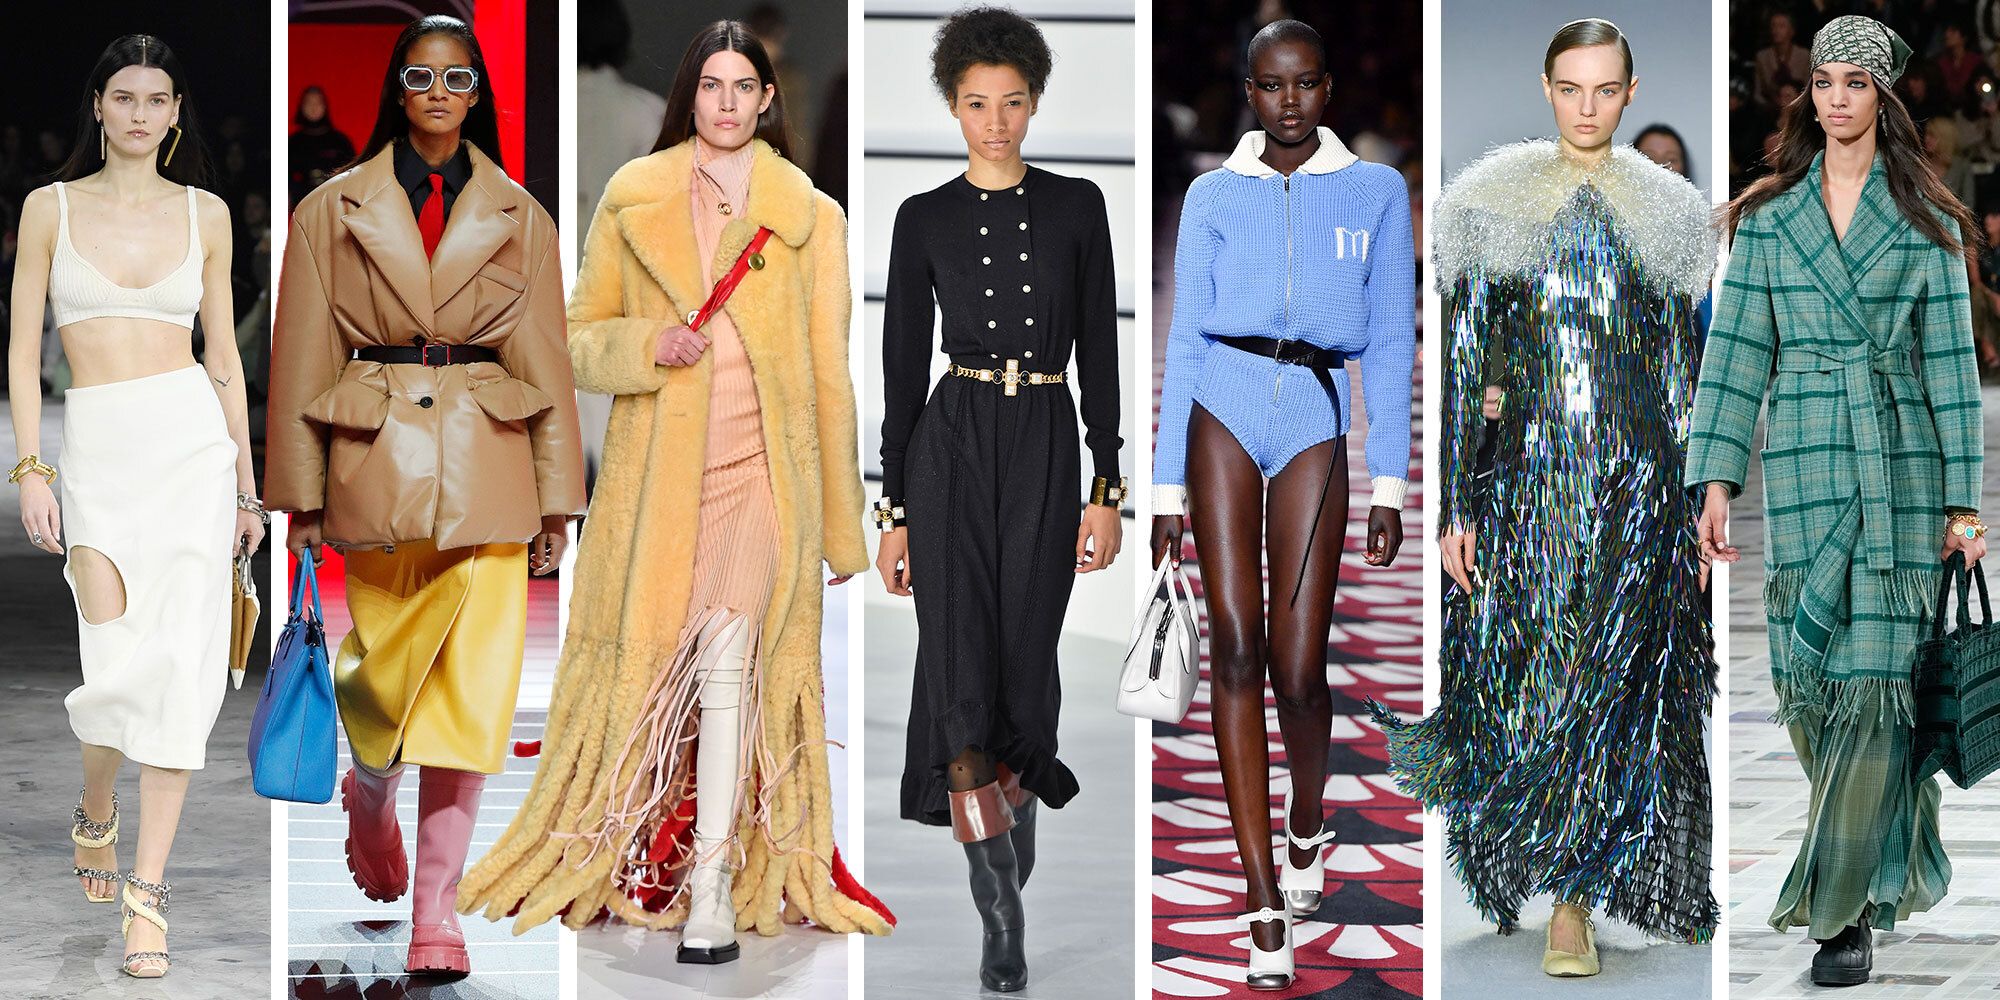 Top 6 fashion trends from Fall/Winter 2020 runways